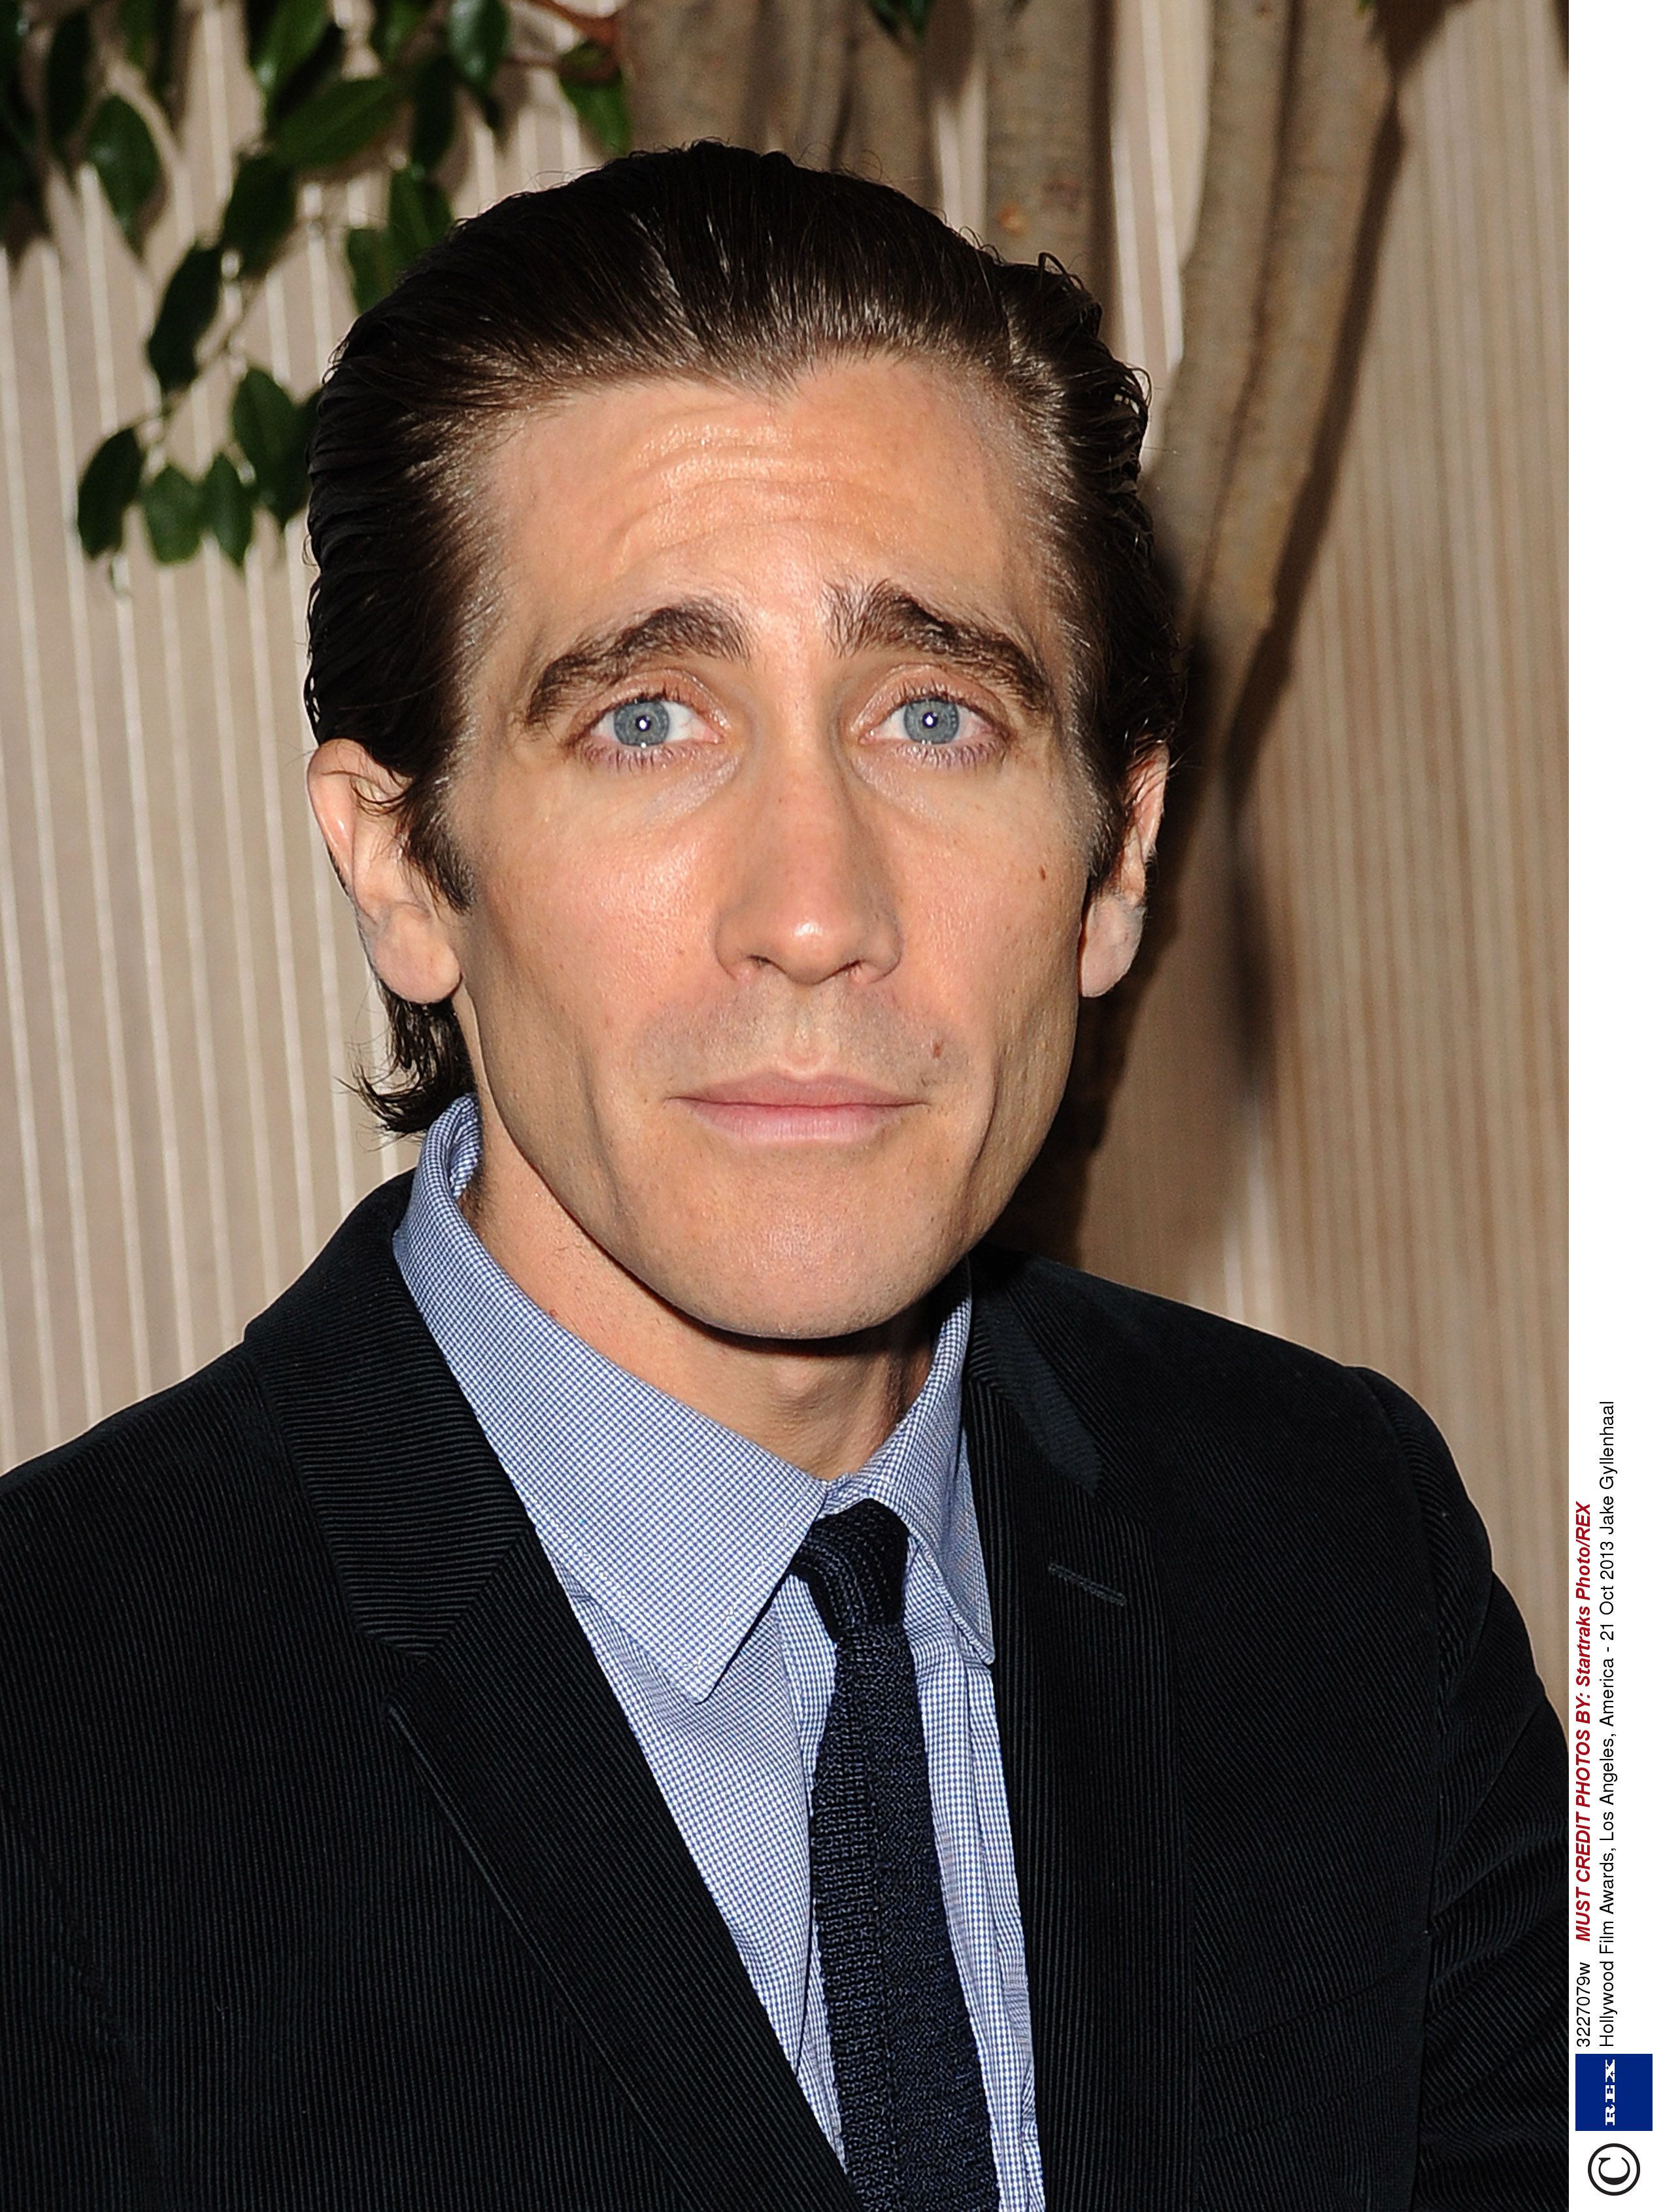 Get Jake Gyllenhaal's Stylish Haircut from the Movie Prisoners